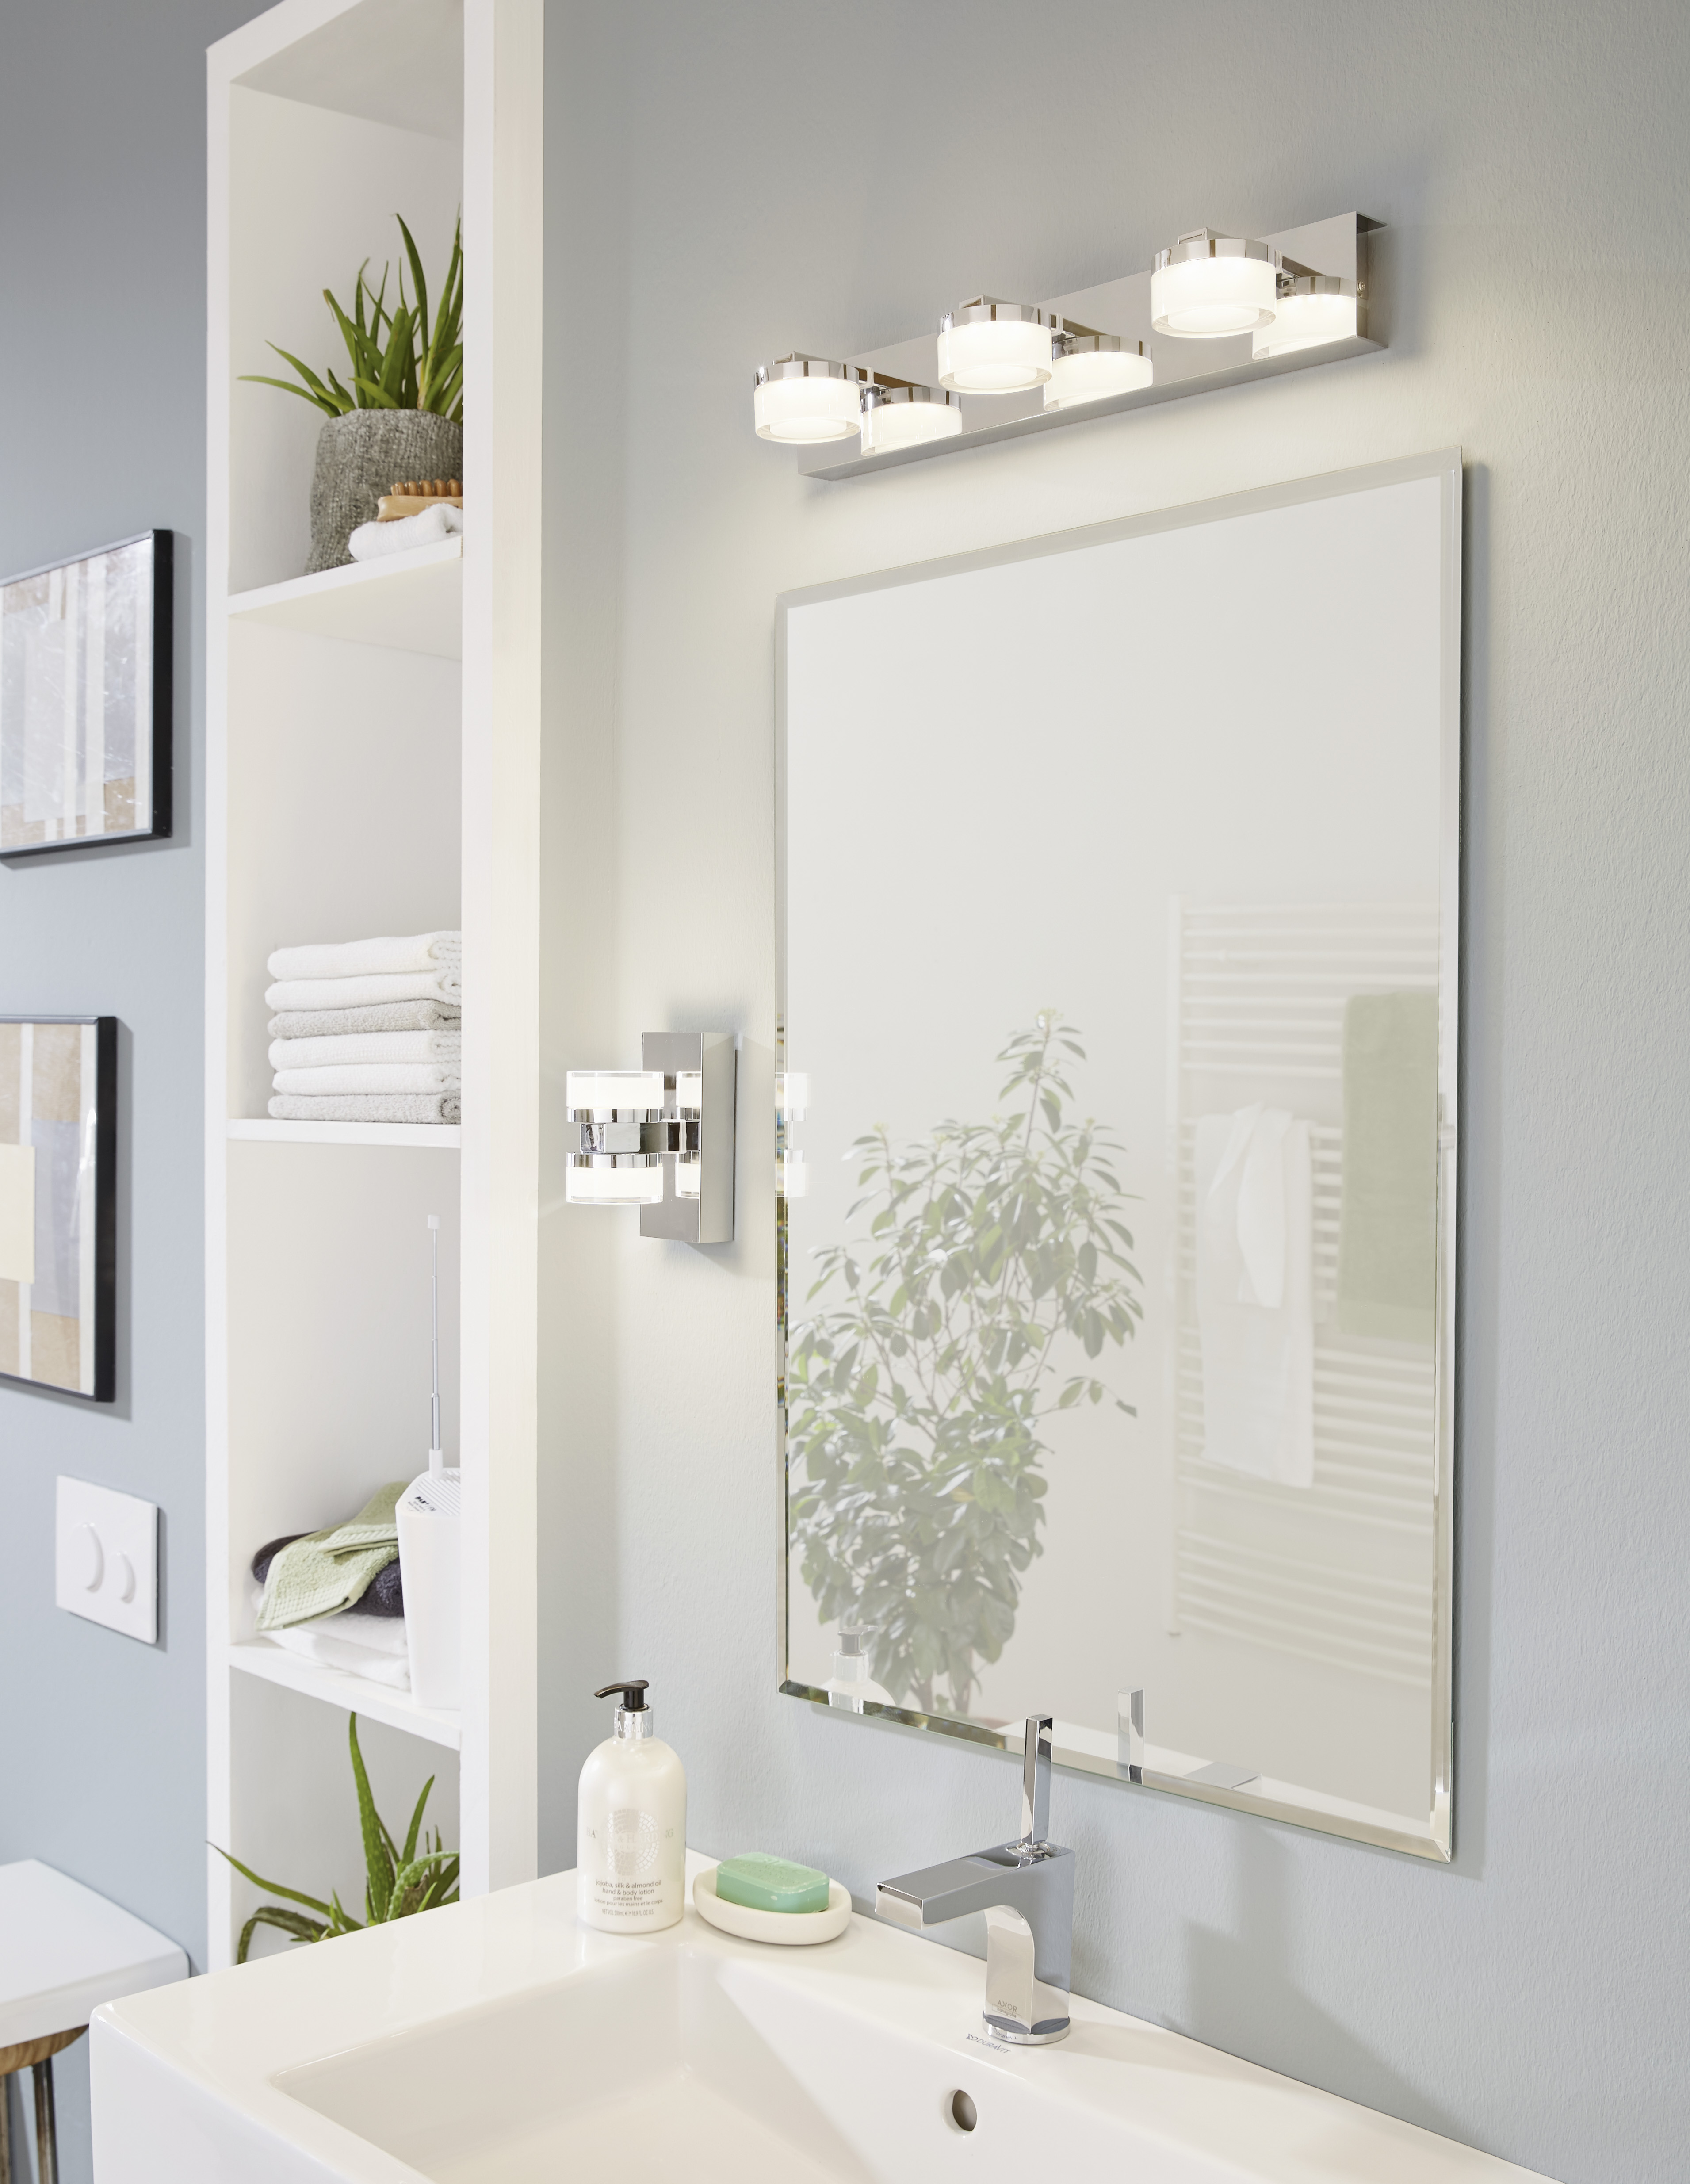 Modern wall sconce ROMENDO Eglo 94653A in the bathroom above the sink with mirror